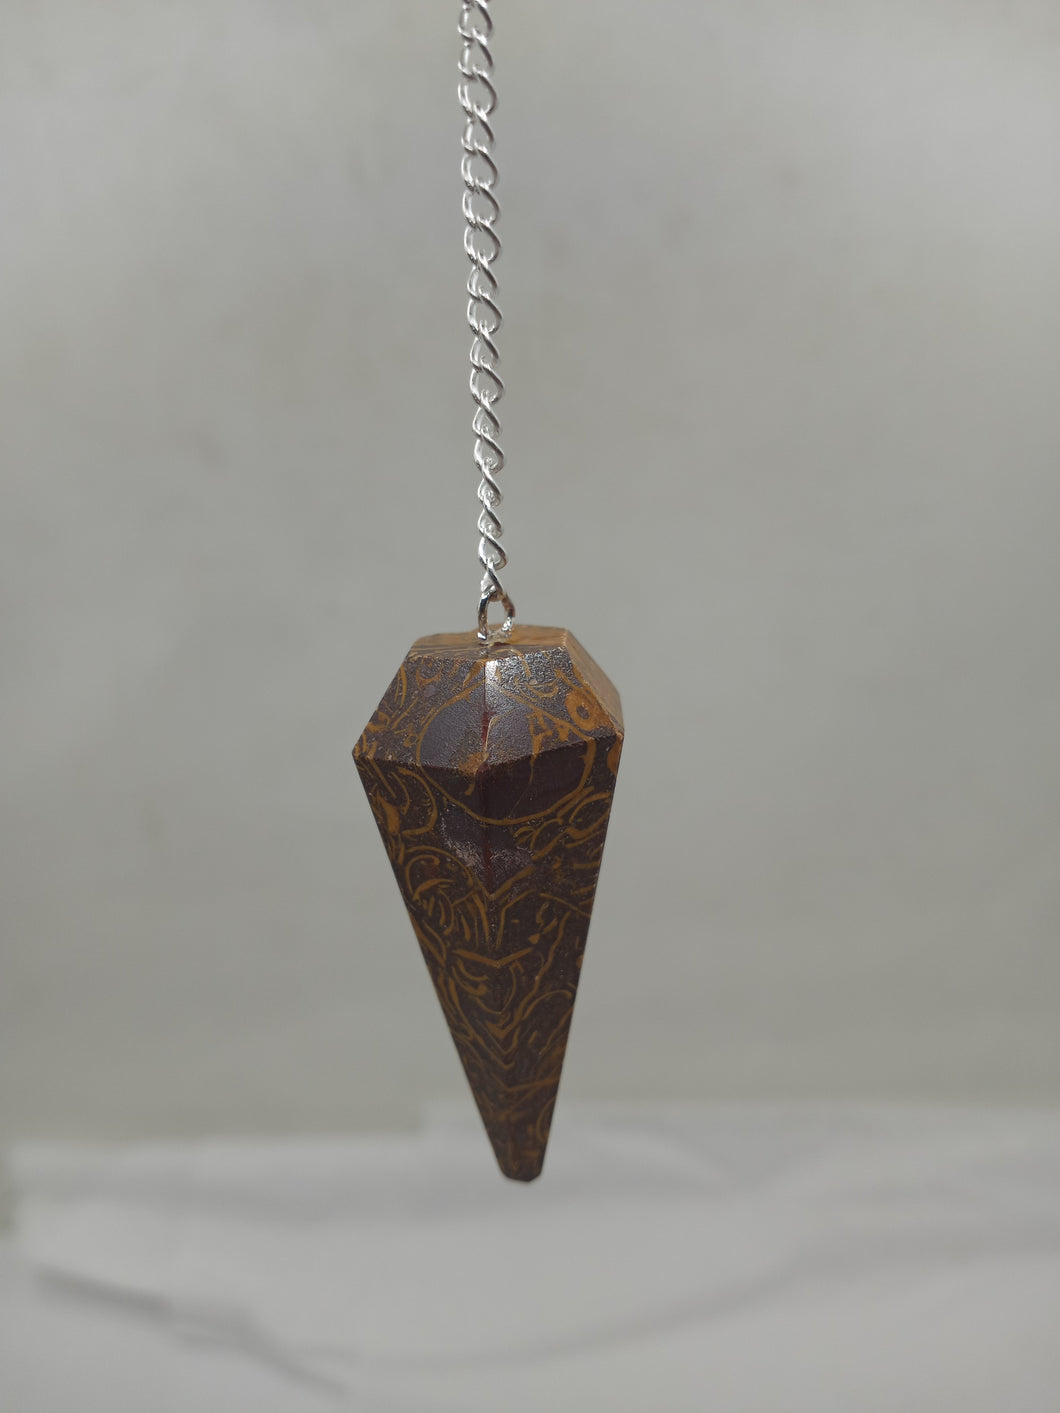 A beautiful brown Miriam stone pendulum elegantly hangs from a silver chain.